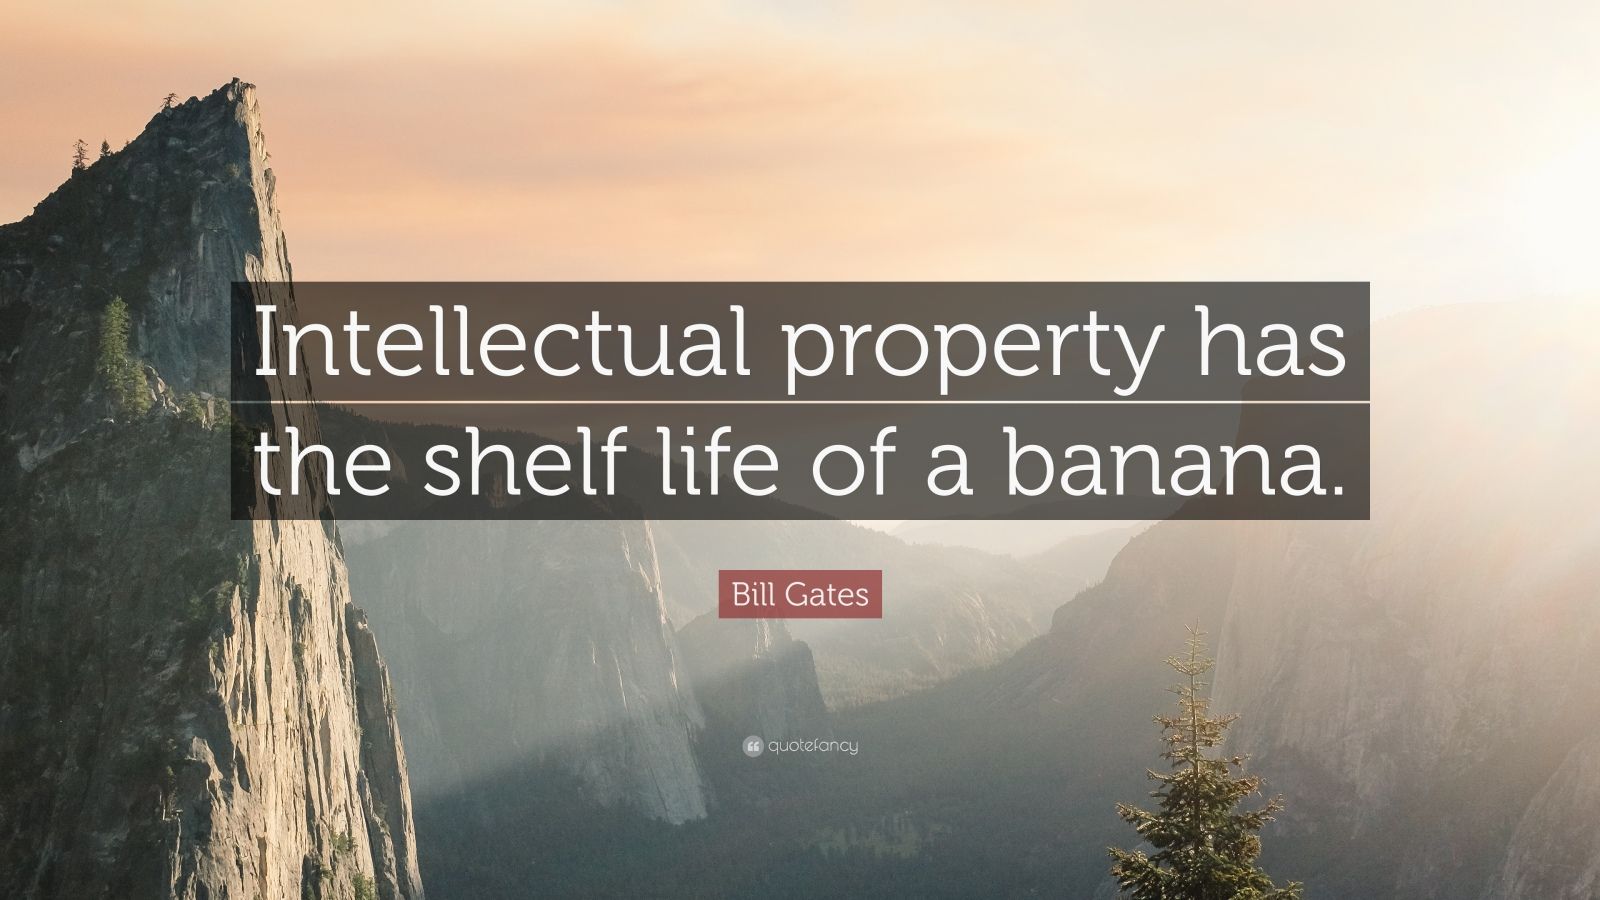 Bill Gates Quote: “Intellectual property has the shelf life of a banana.”